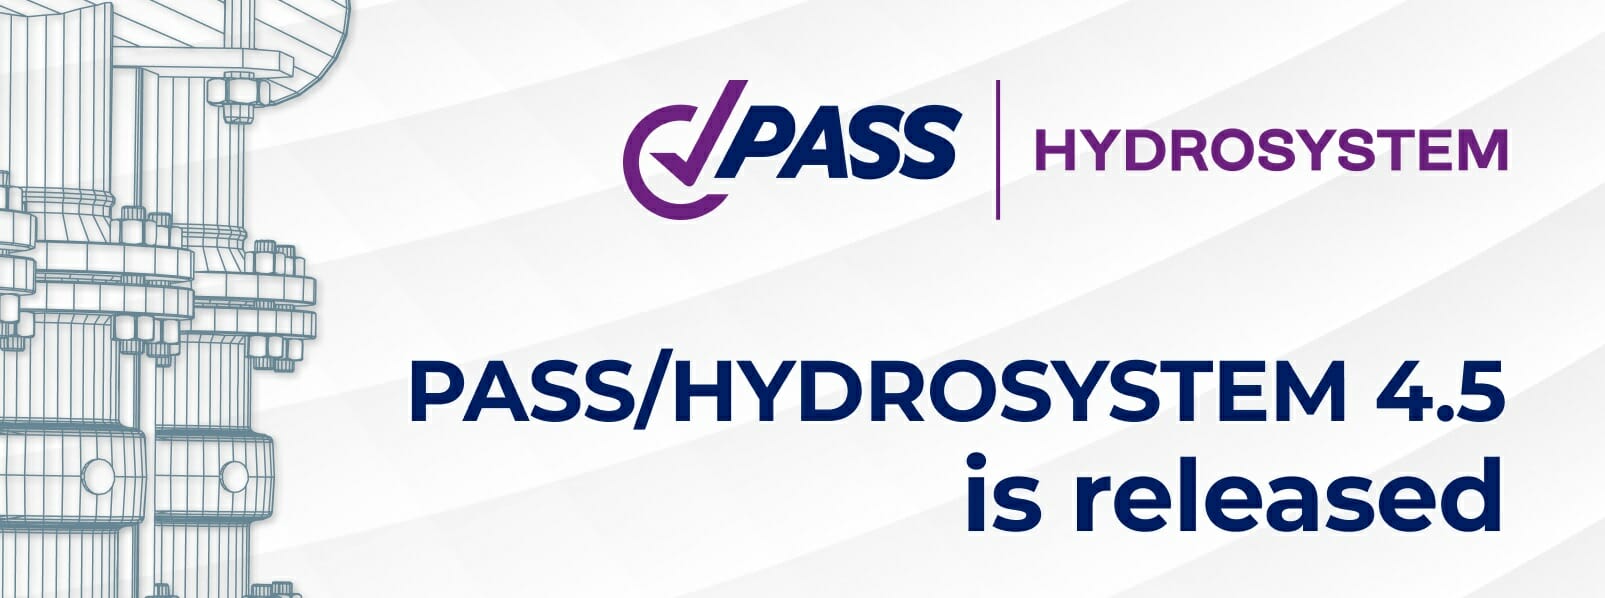 Fluids & Co and PASS Team Announce Release of PASS/HYDROSYSTEM 4.5